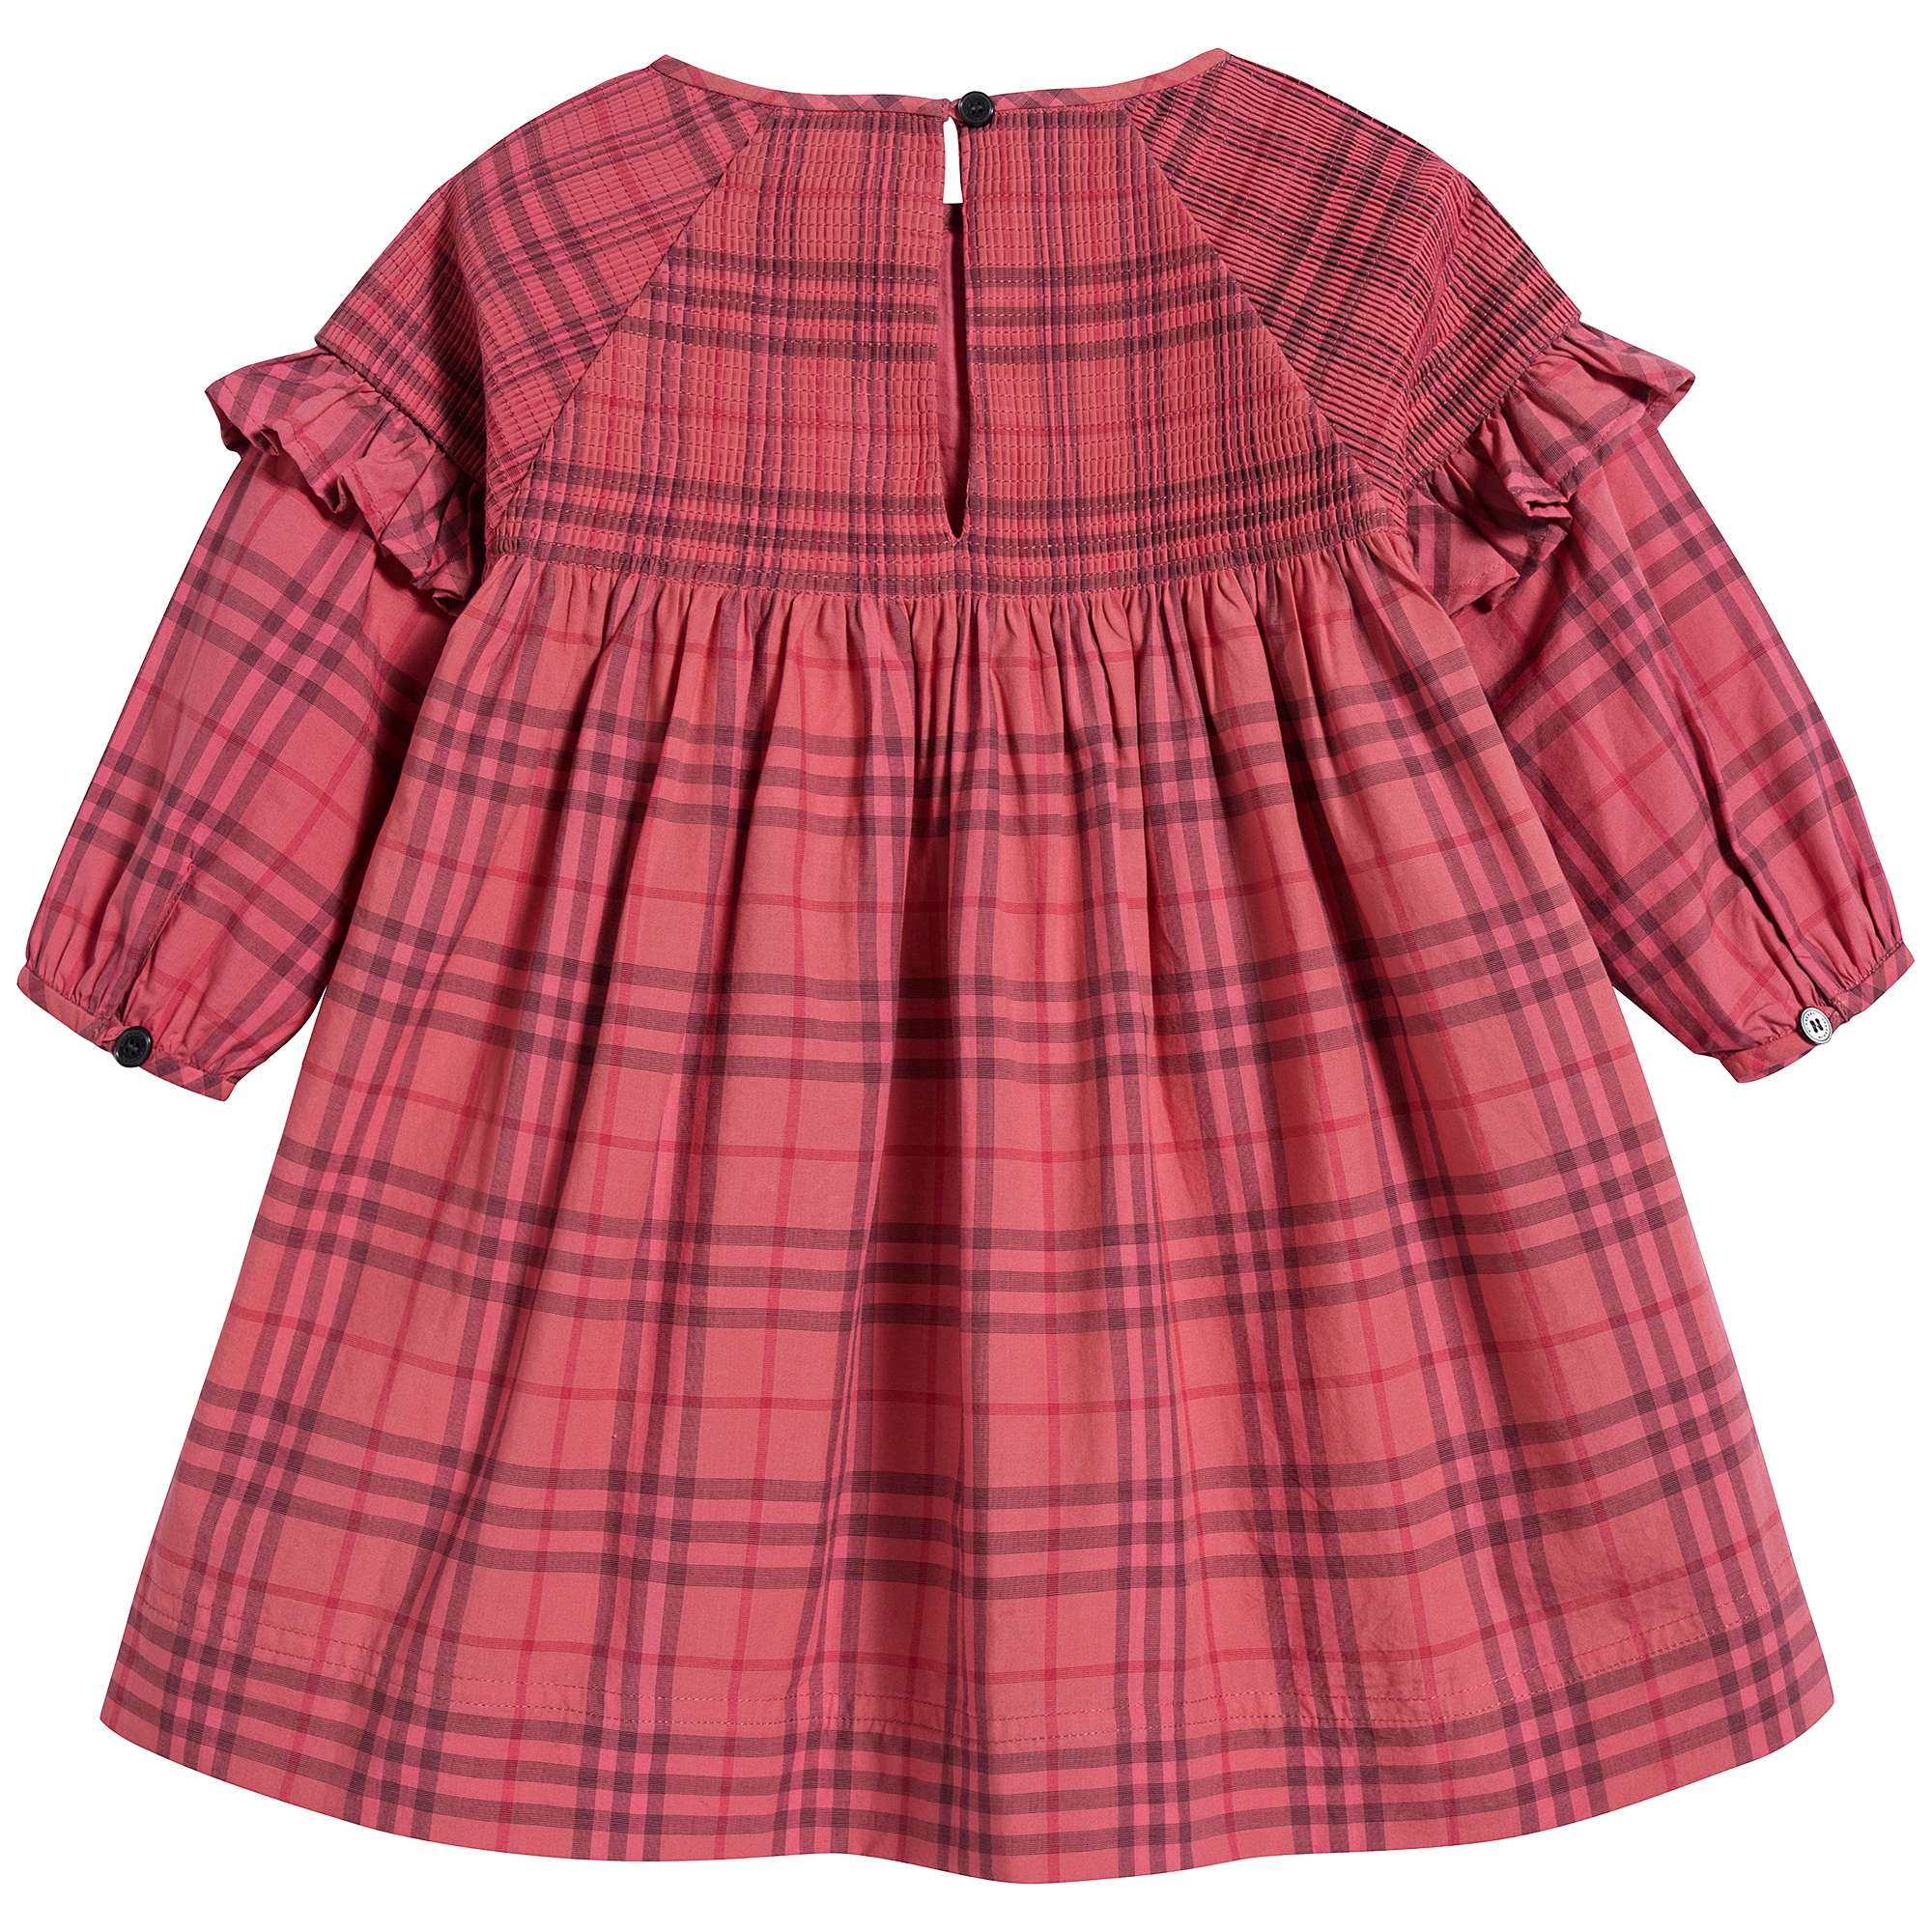 Baby Girls Coral Red Cotton Dress